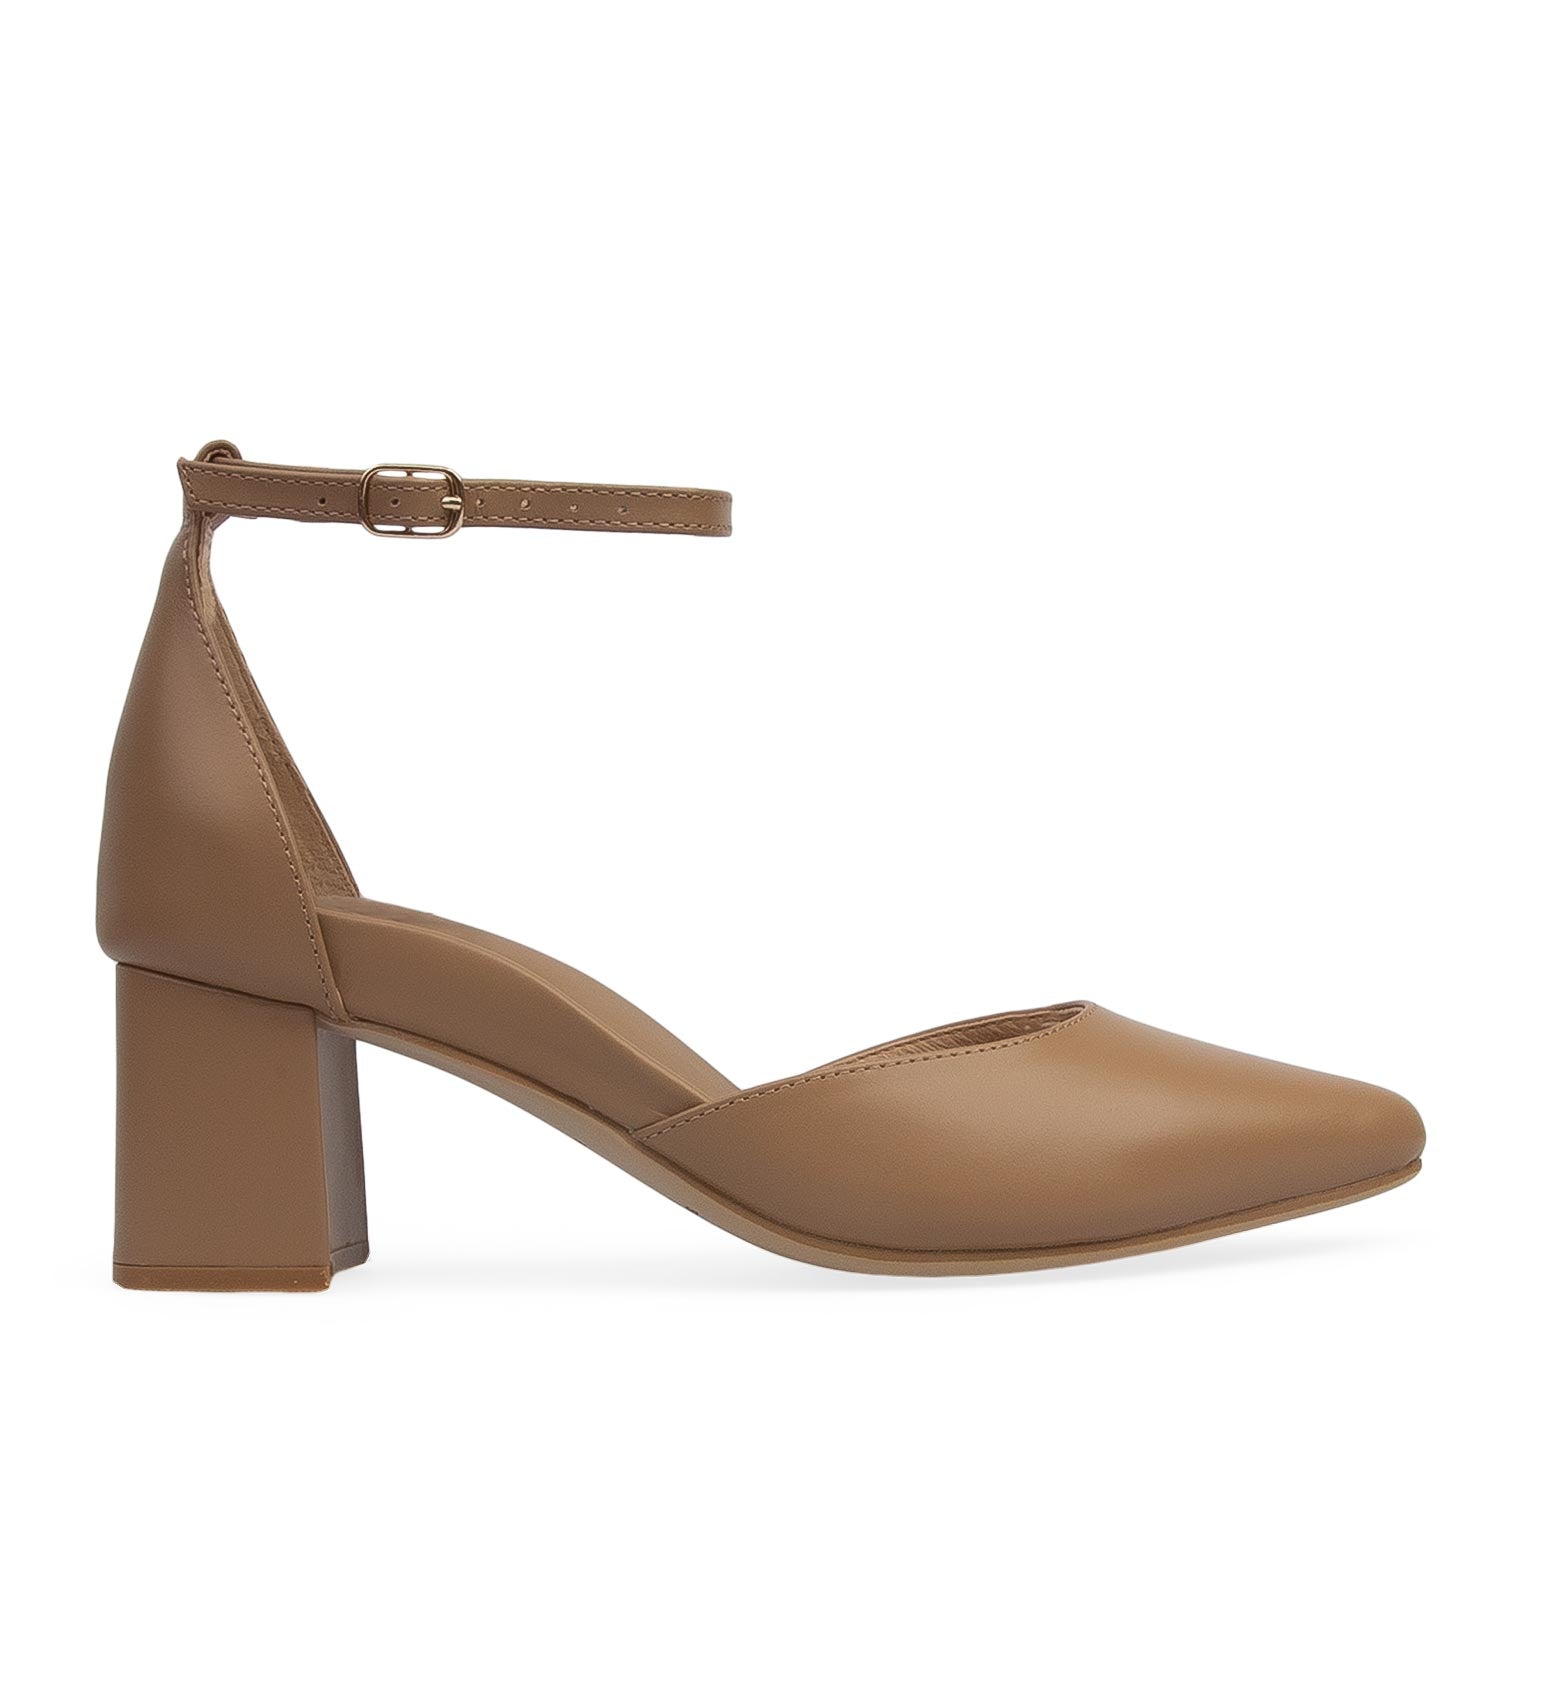 Griffon Taupe Leather Low Heels | Bared Footwear